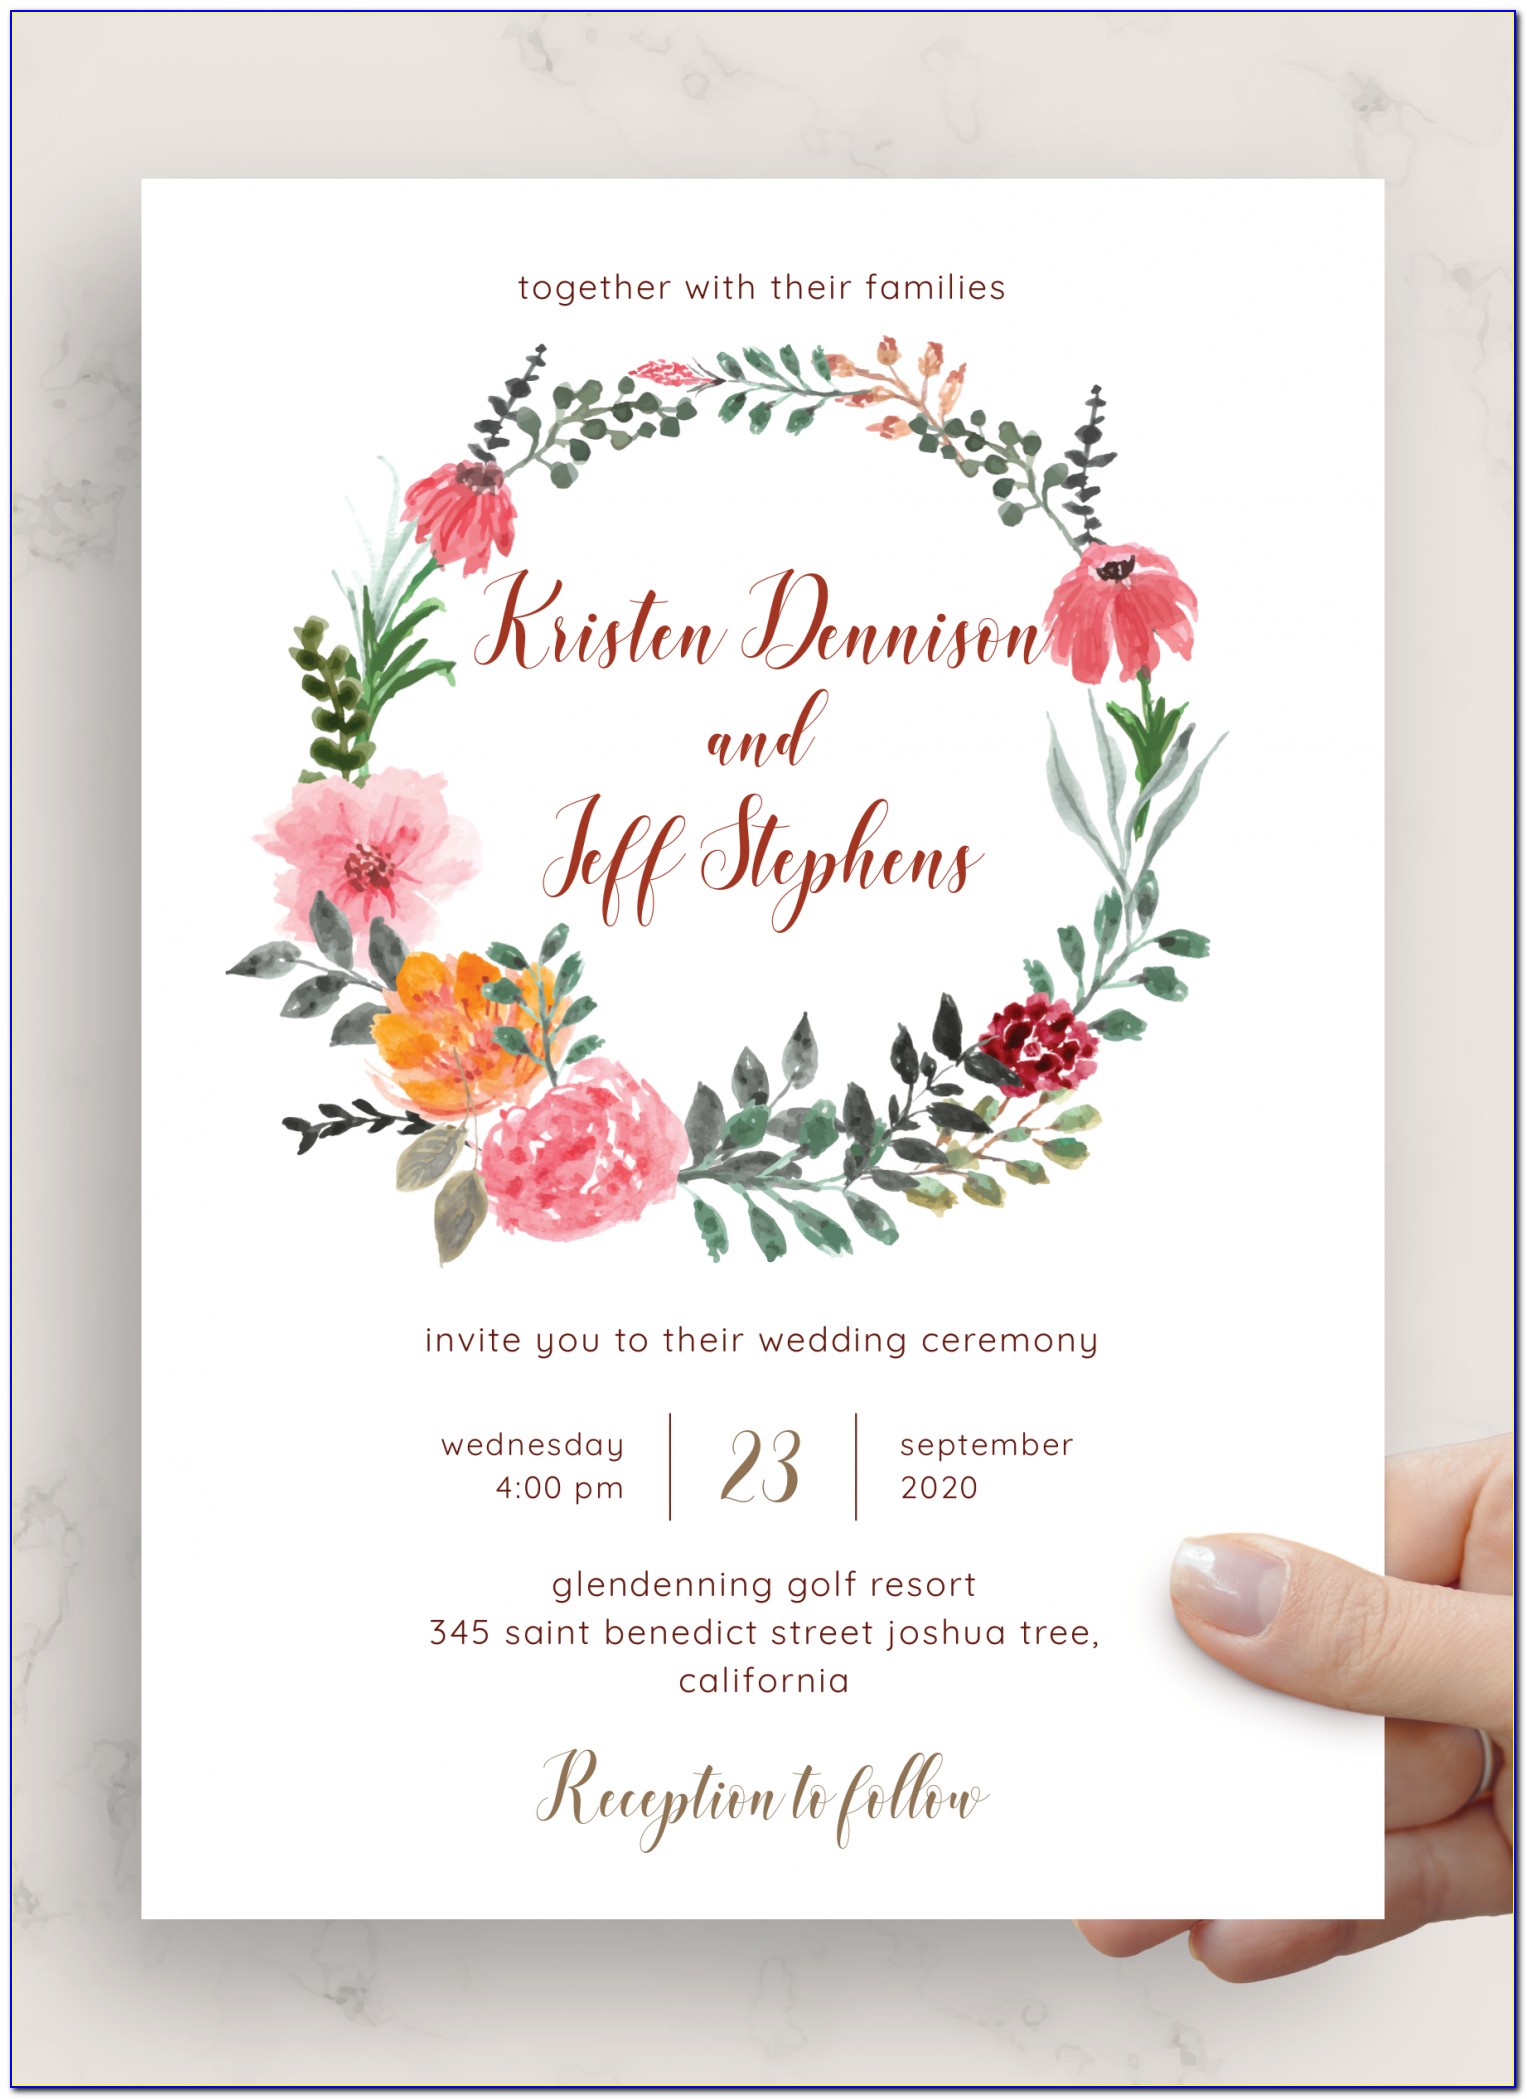 Invitation Card Background Images Free Download